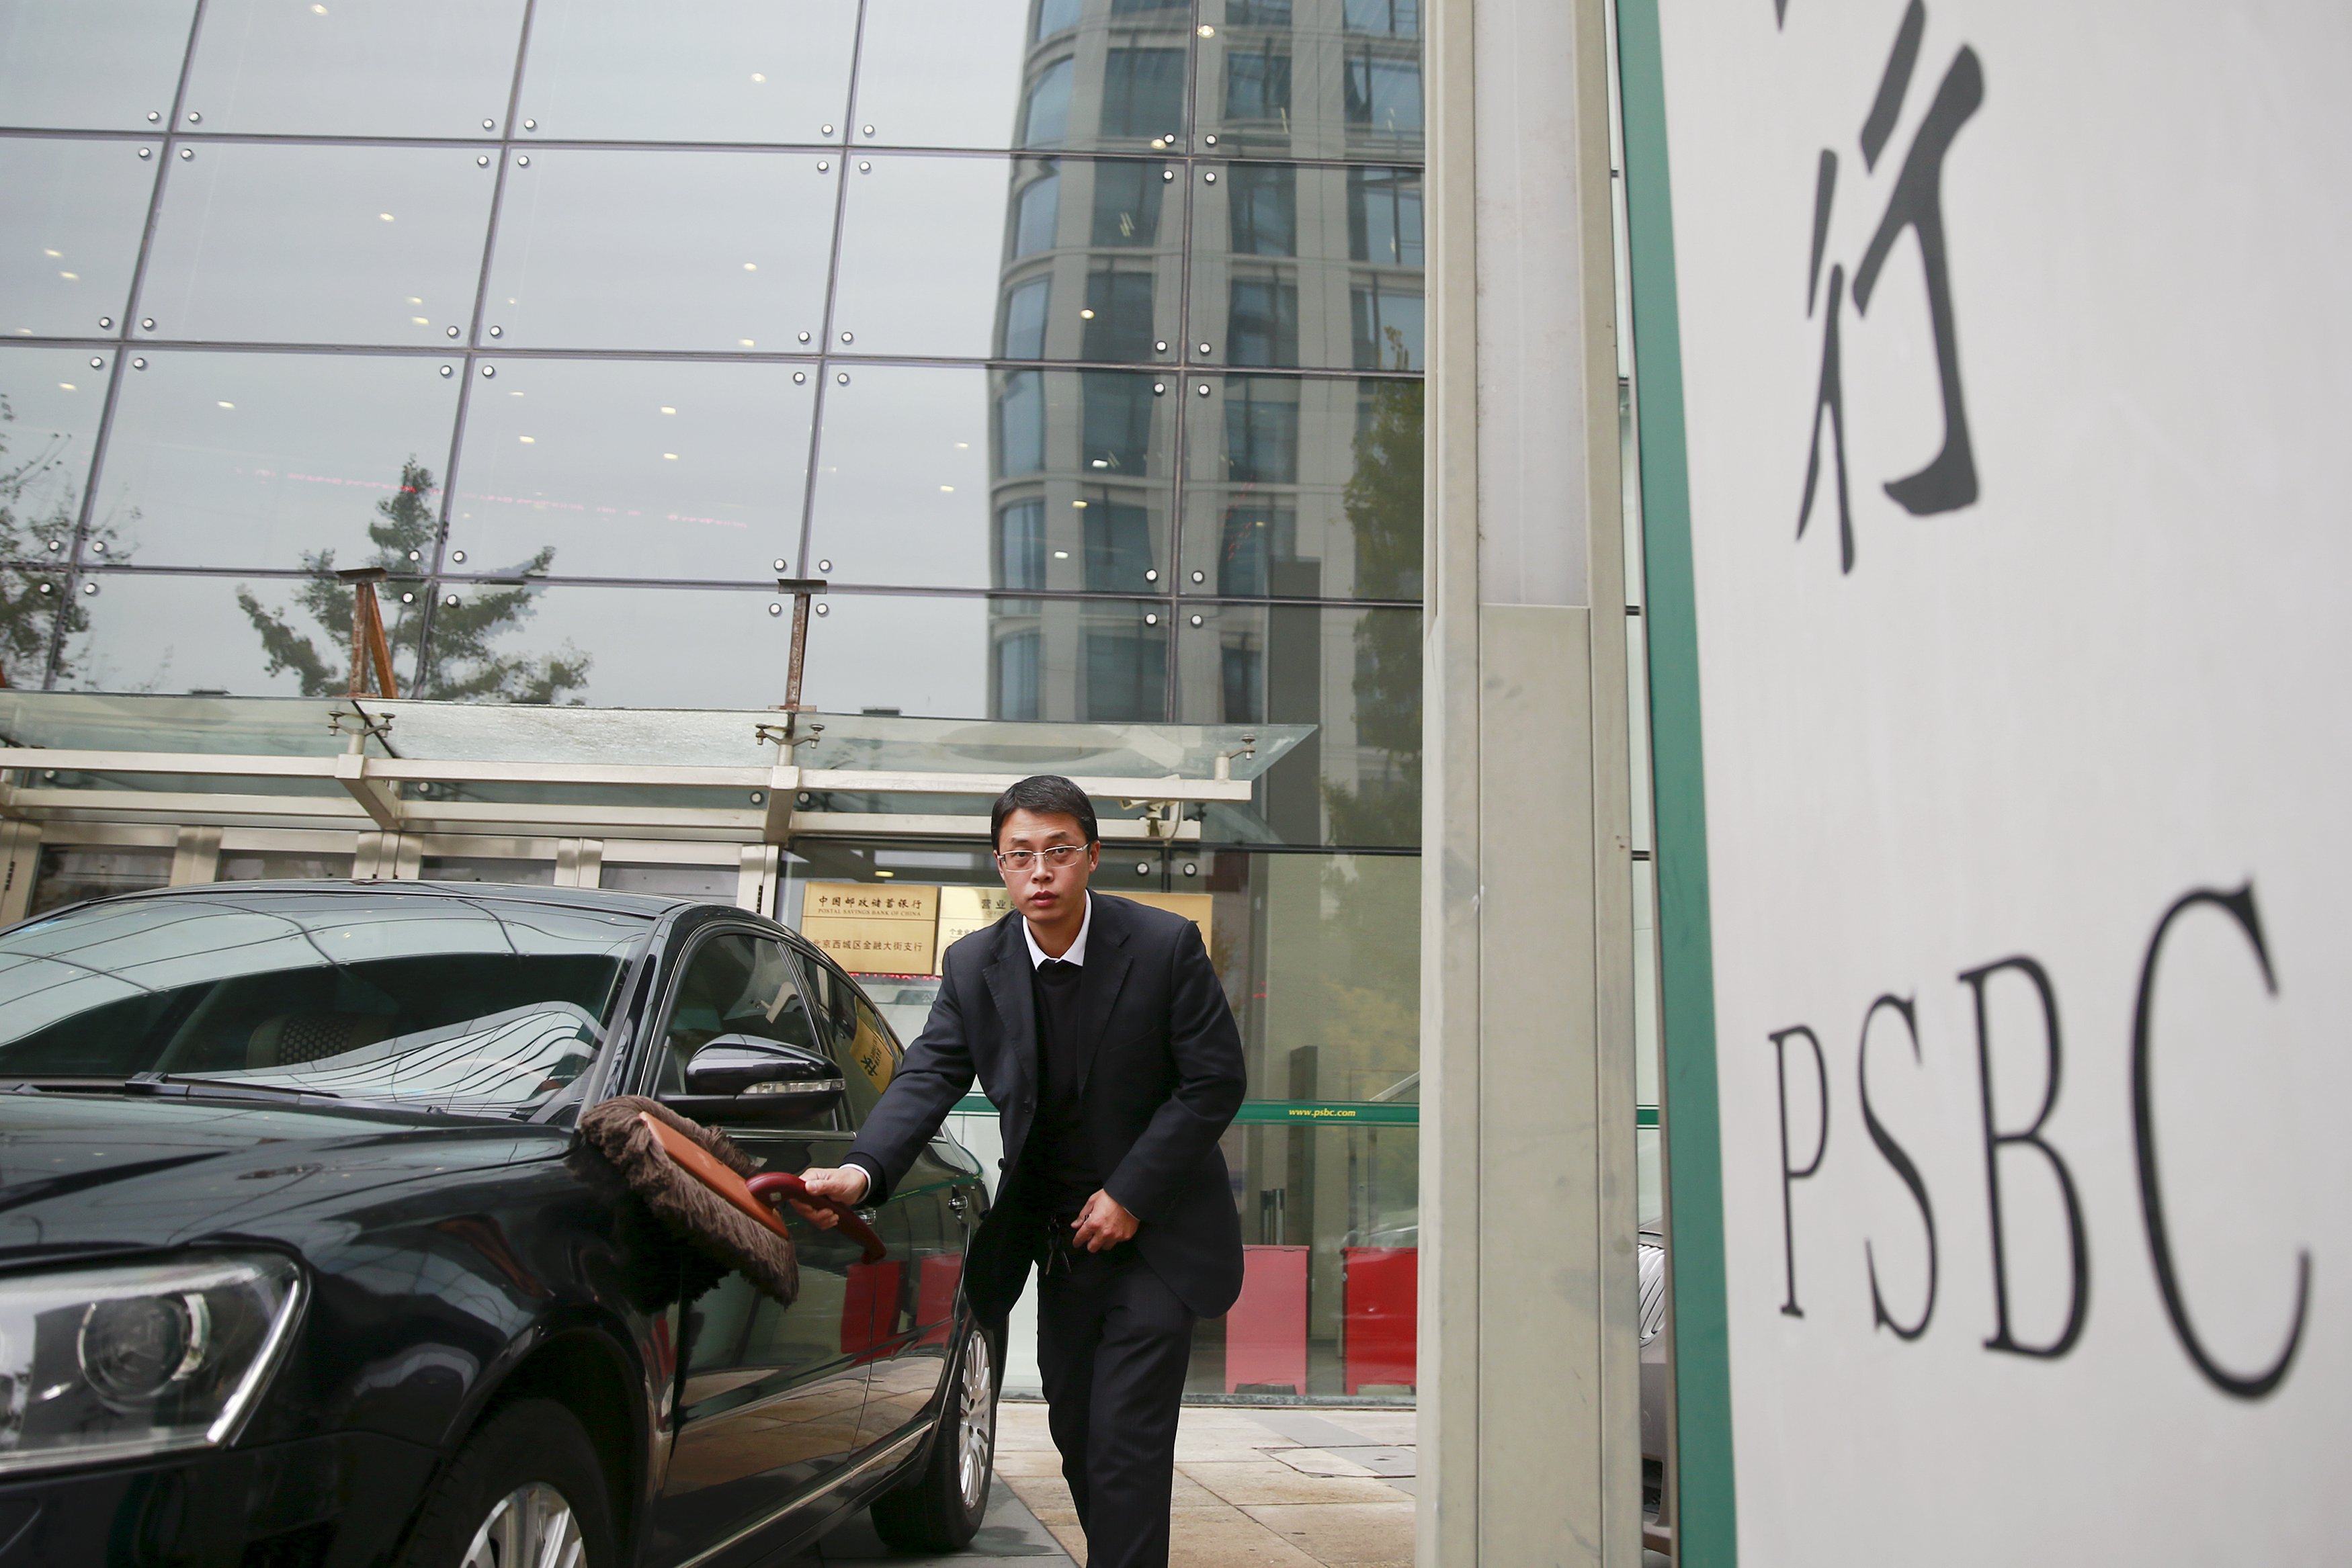 A man cleans a car outside a branch of Postal Savings Bank of China (PSBC) in downtown Beijing, China, November 12, 2015. State-owned Postal Savings Bank of China (PSBC) is expected to soon close the sale of a 15 percent stake mainly to foreign investors ahead of a planned up to $20 billion IPO in Hong Kong in 2016, people with knowledge of the matter said. REUTERS/Damir Sagolj